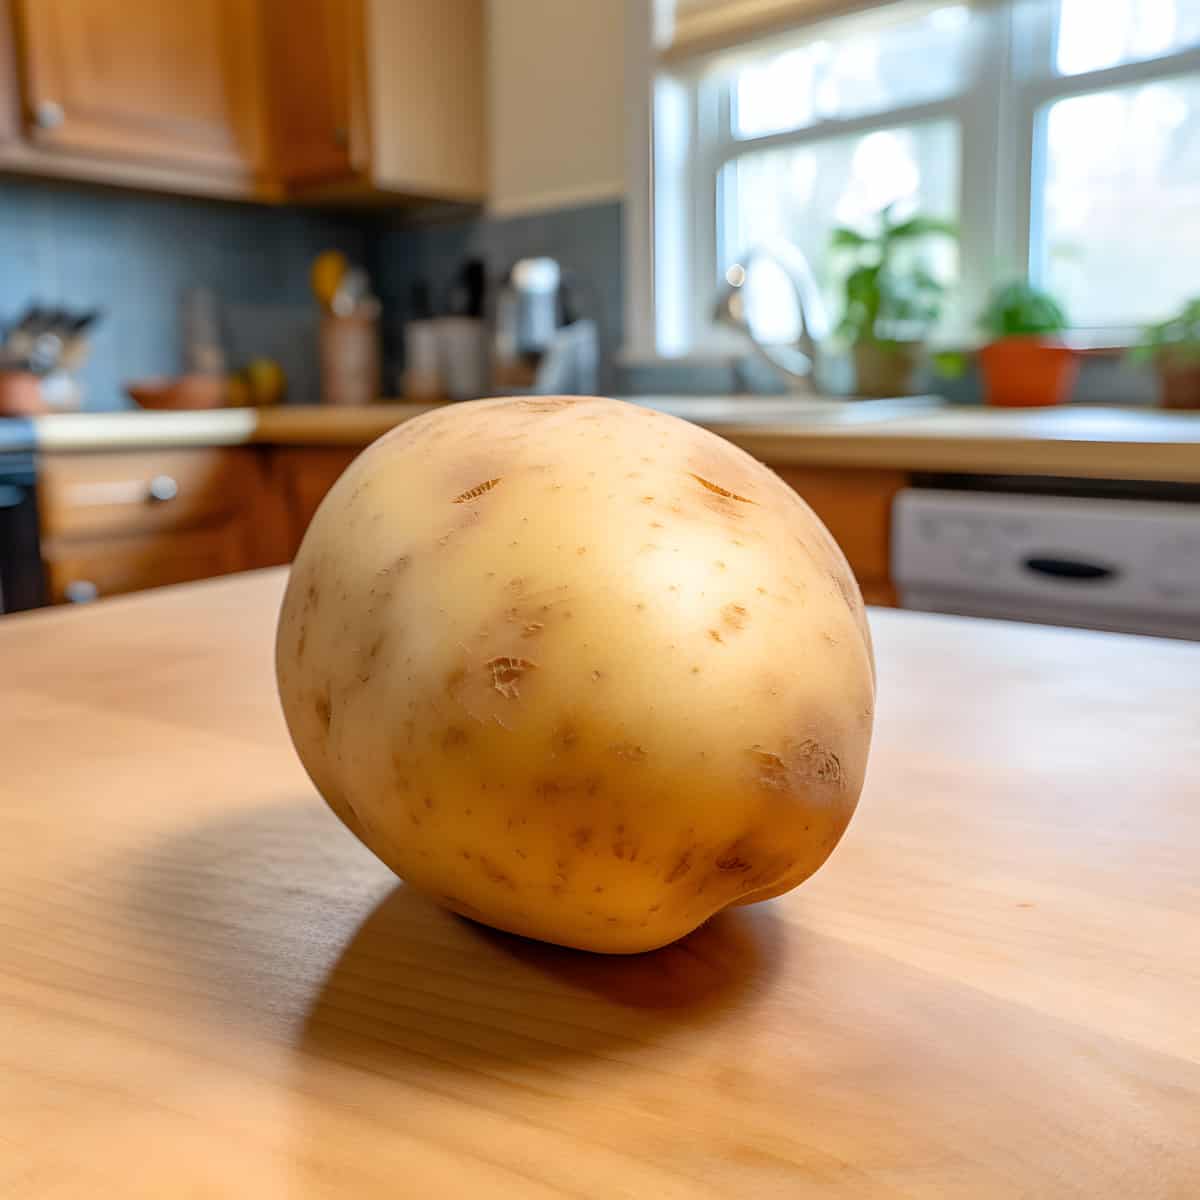 Marcy Potatoes on a kitchen counter